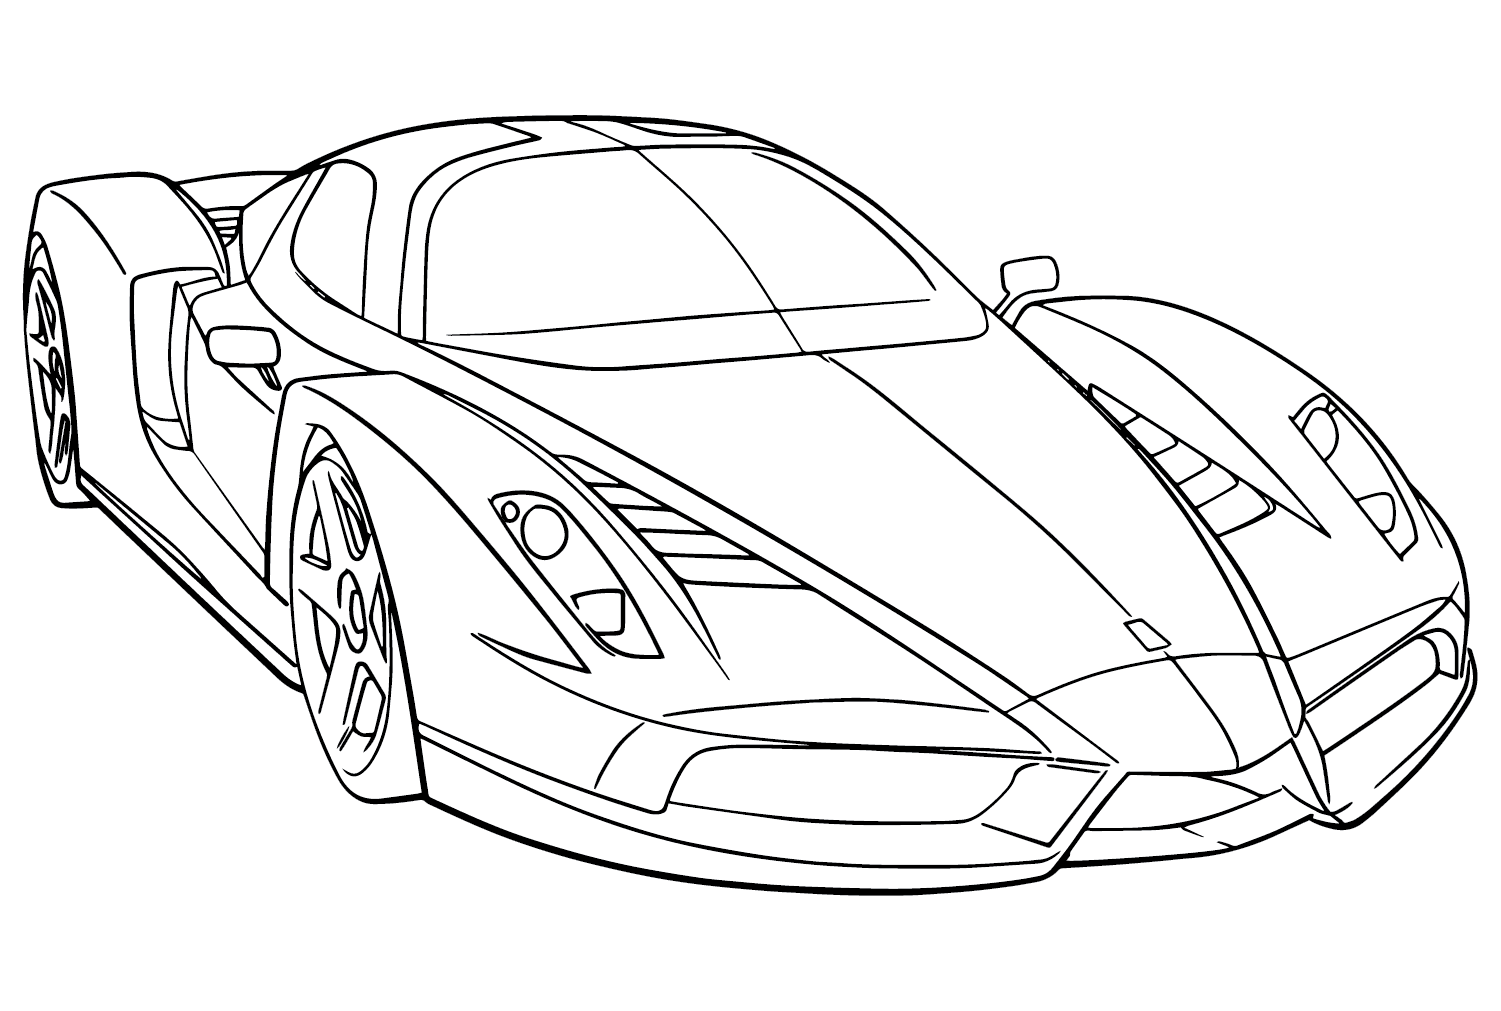 Ferrari Coloring Page - Free Printable Coloring Pages